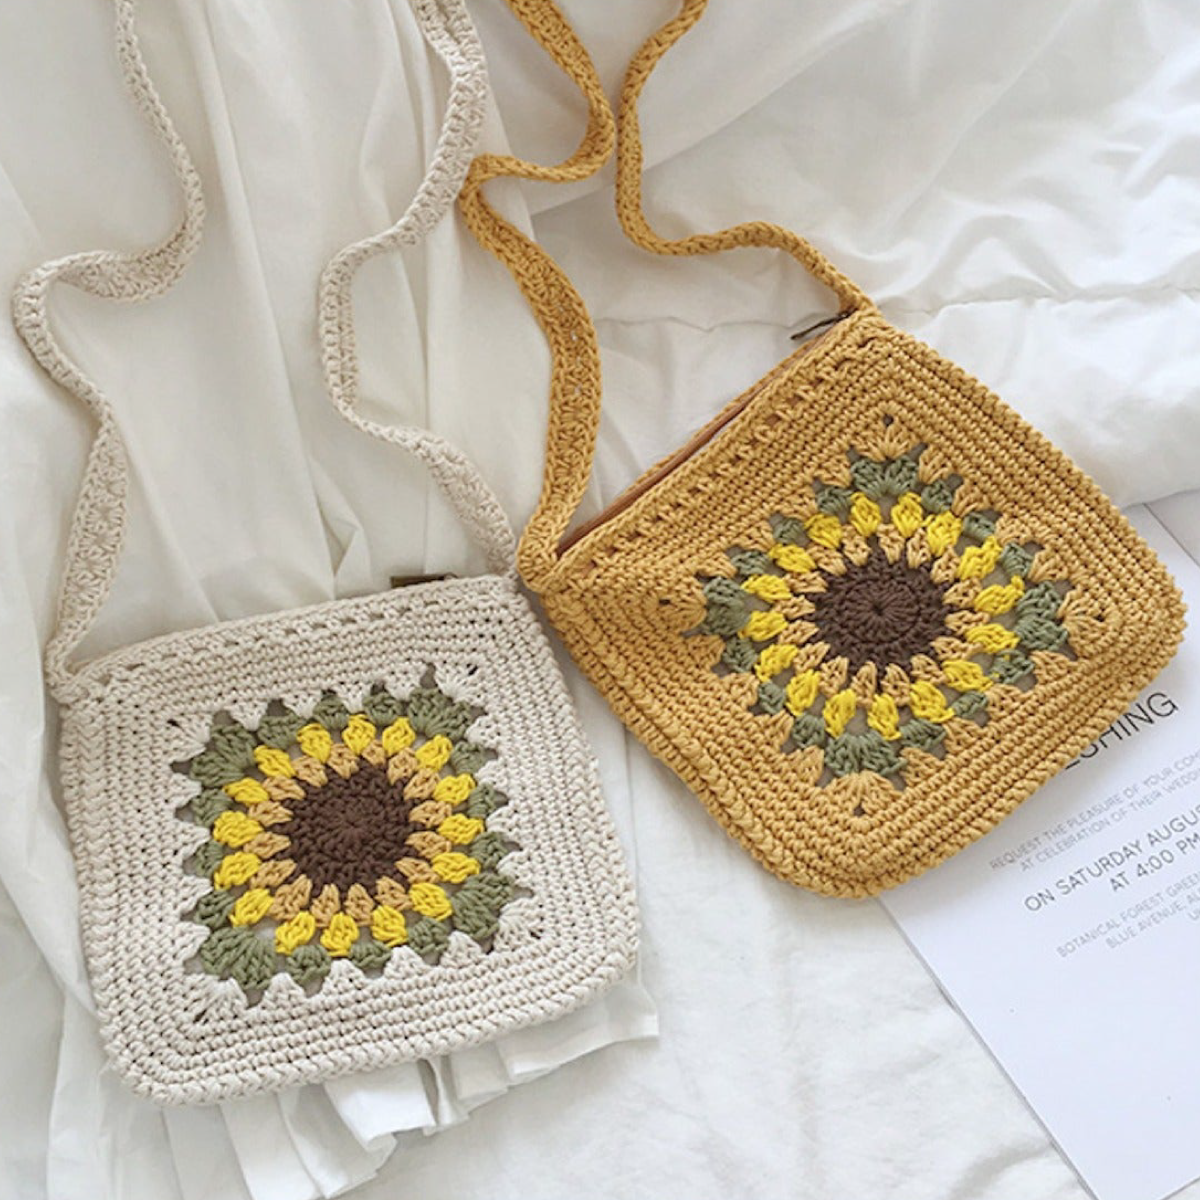 Star-Bag Crochet Body and Leather Shoulder Bag in Brown